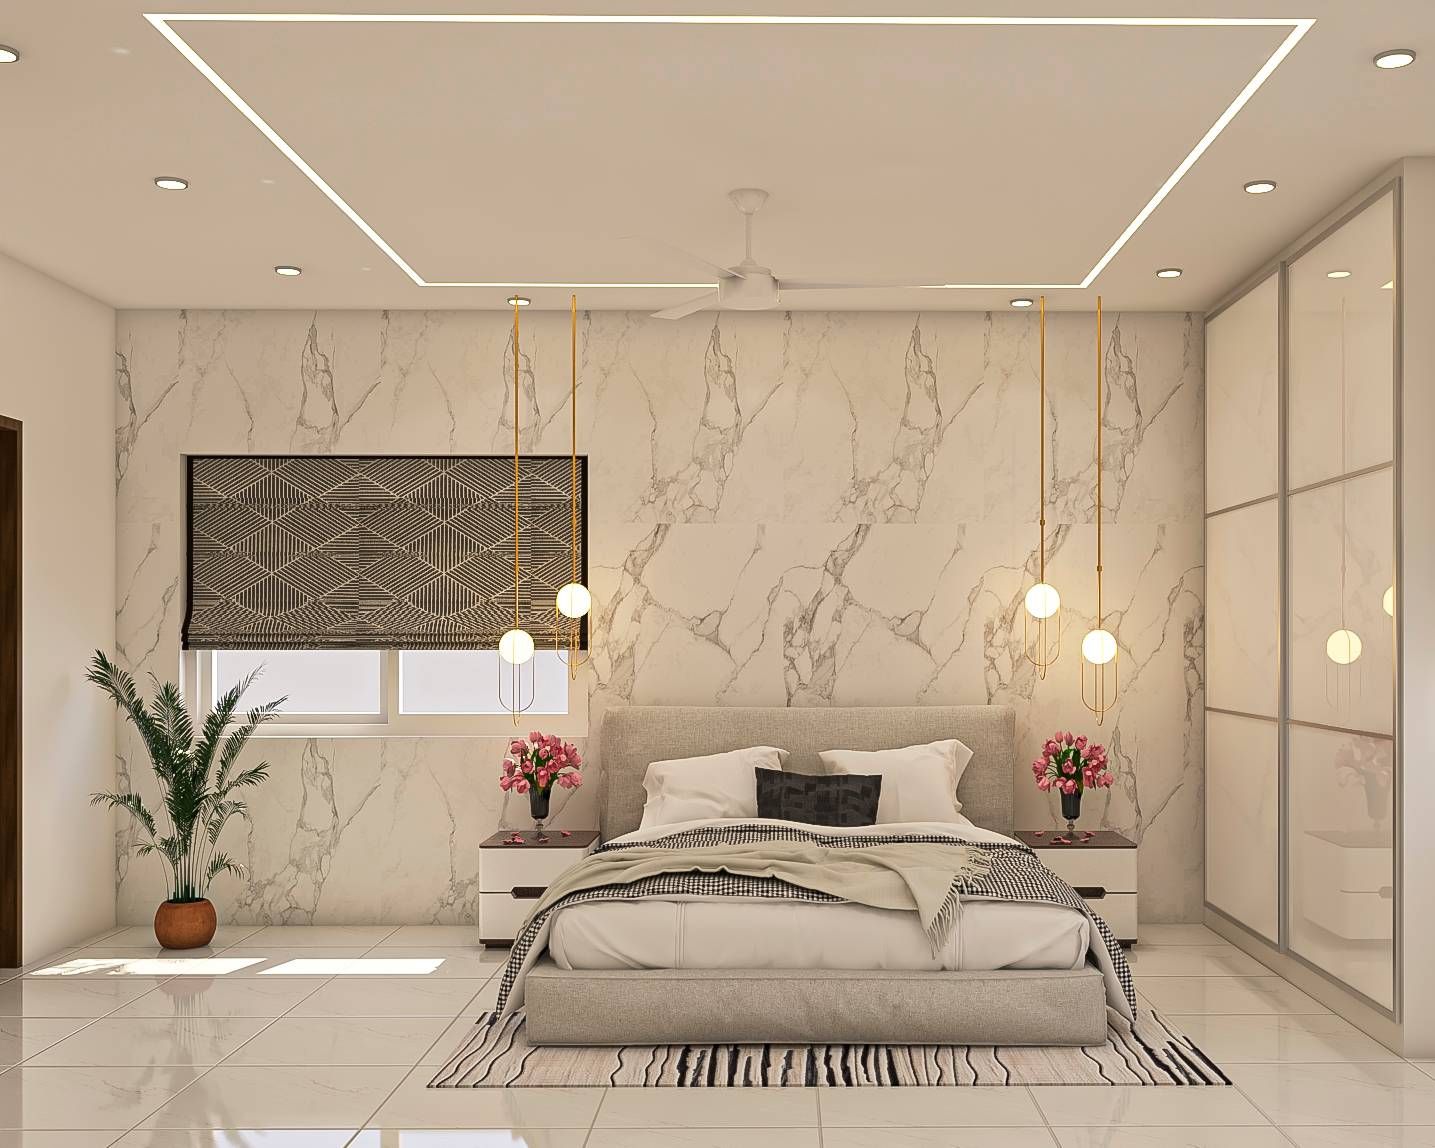 Contemporary Gypsum Single-Layered Bedroom False Ceiling Design With Recessed Lights